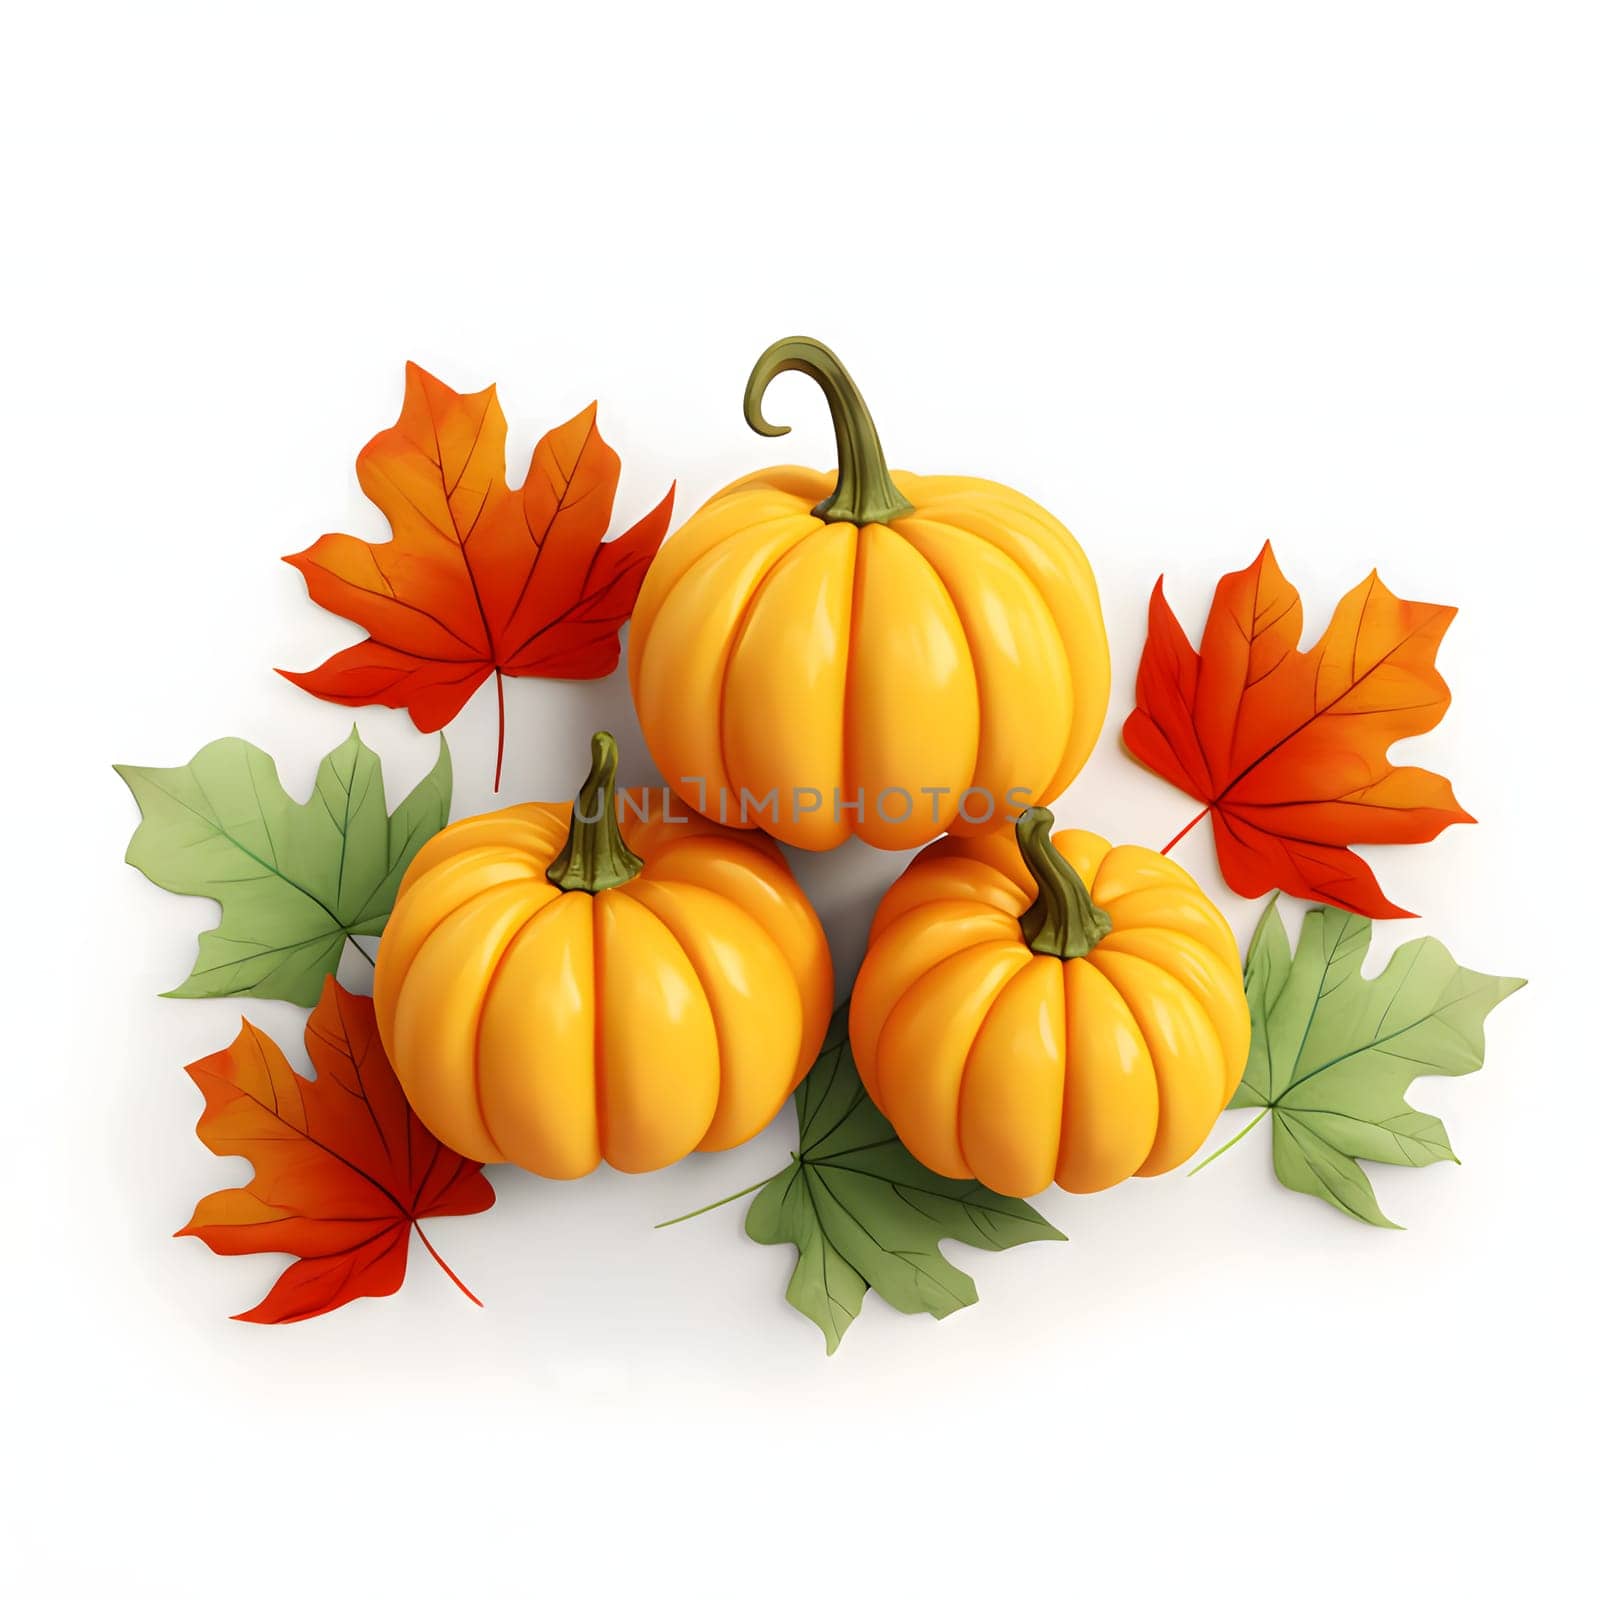 Three small orange pumpkins and autumn leaves. Pumpkin as a dish of thanksgiving for the harvest, picture on a white isolated background. An atmosphere of joy and celebration.